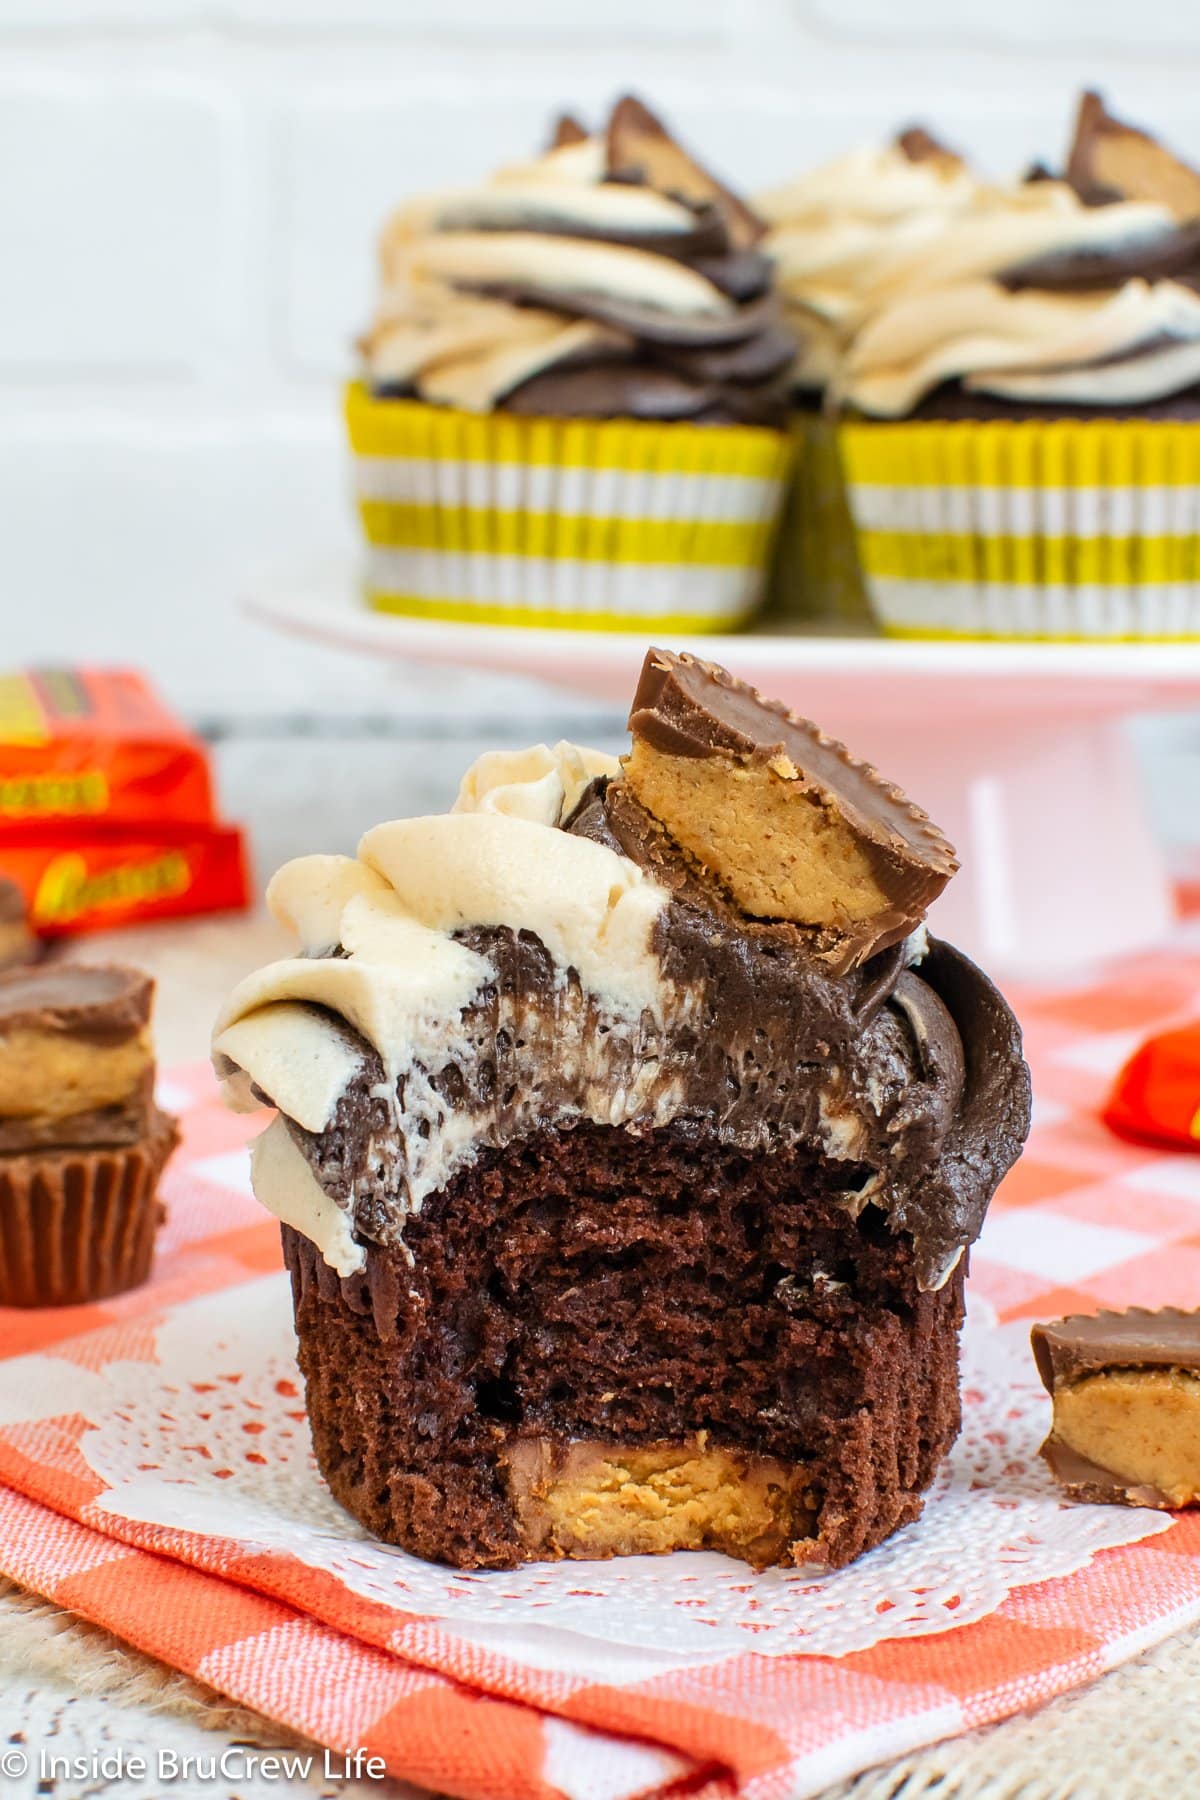 A chocolate cupcake with a peanut butter cup on the bottom.